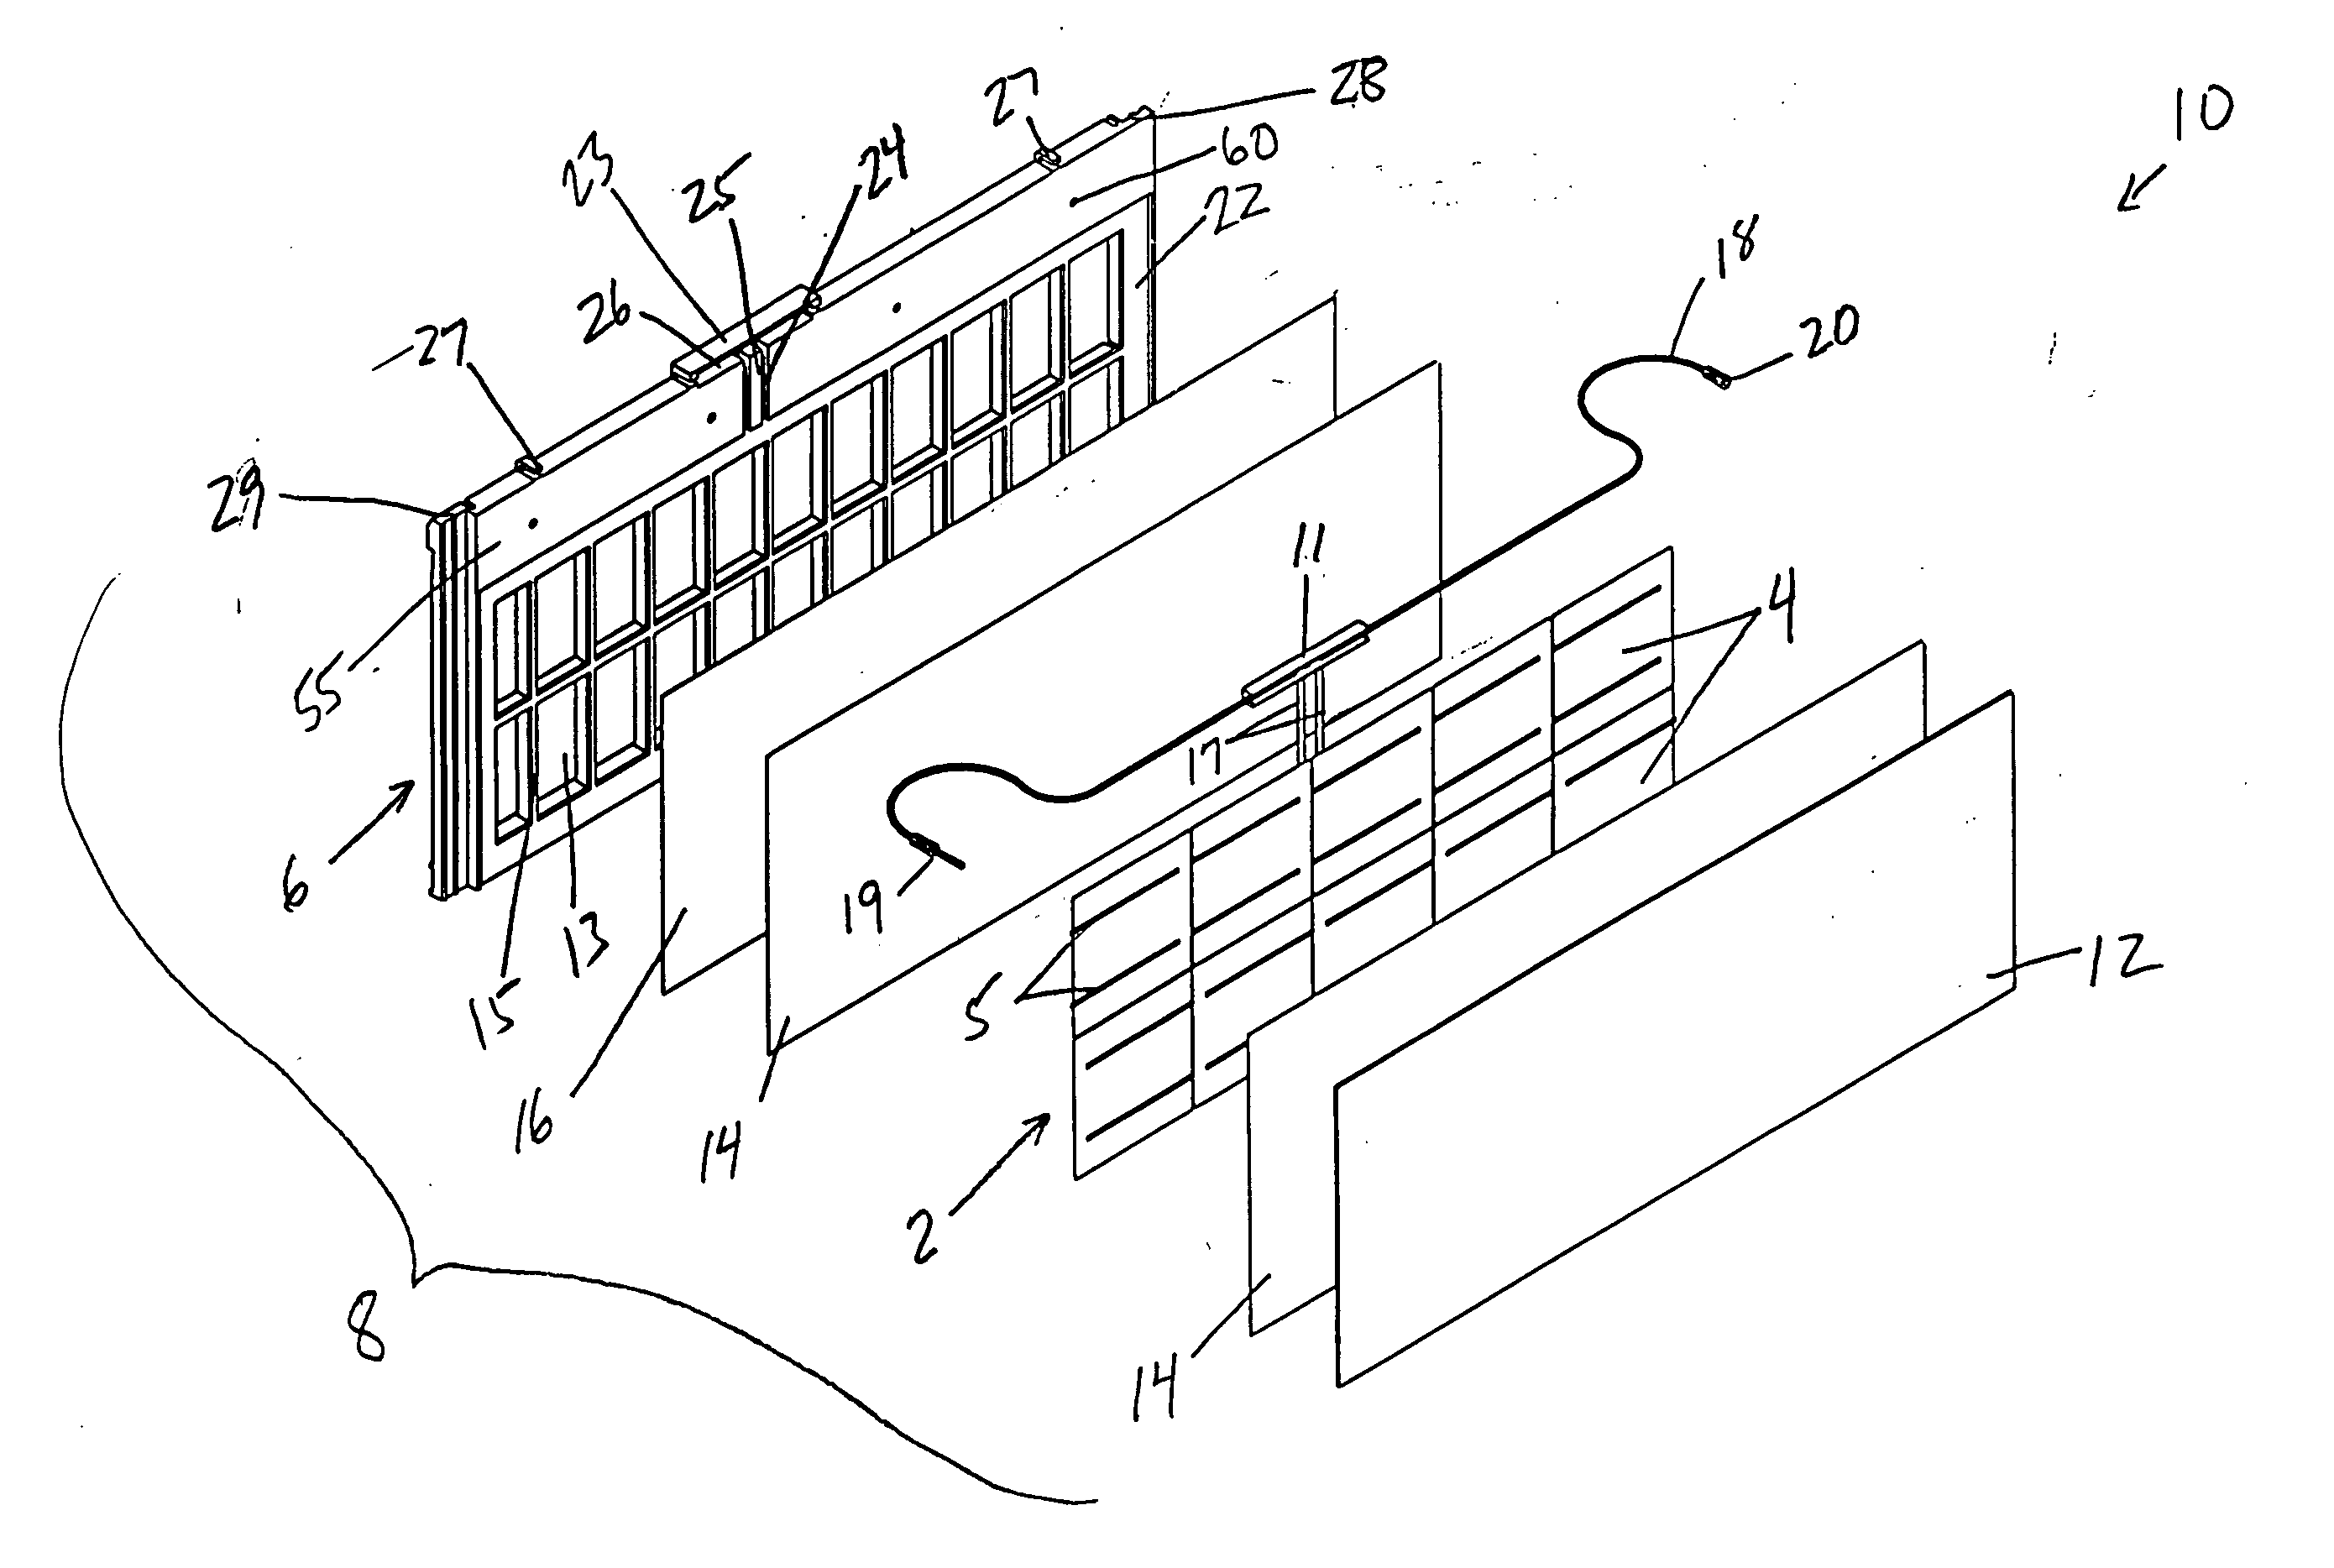 System and method for mounting photovoltaic cells